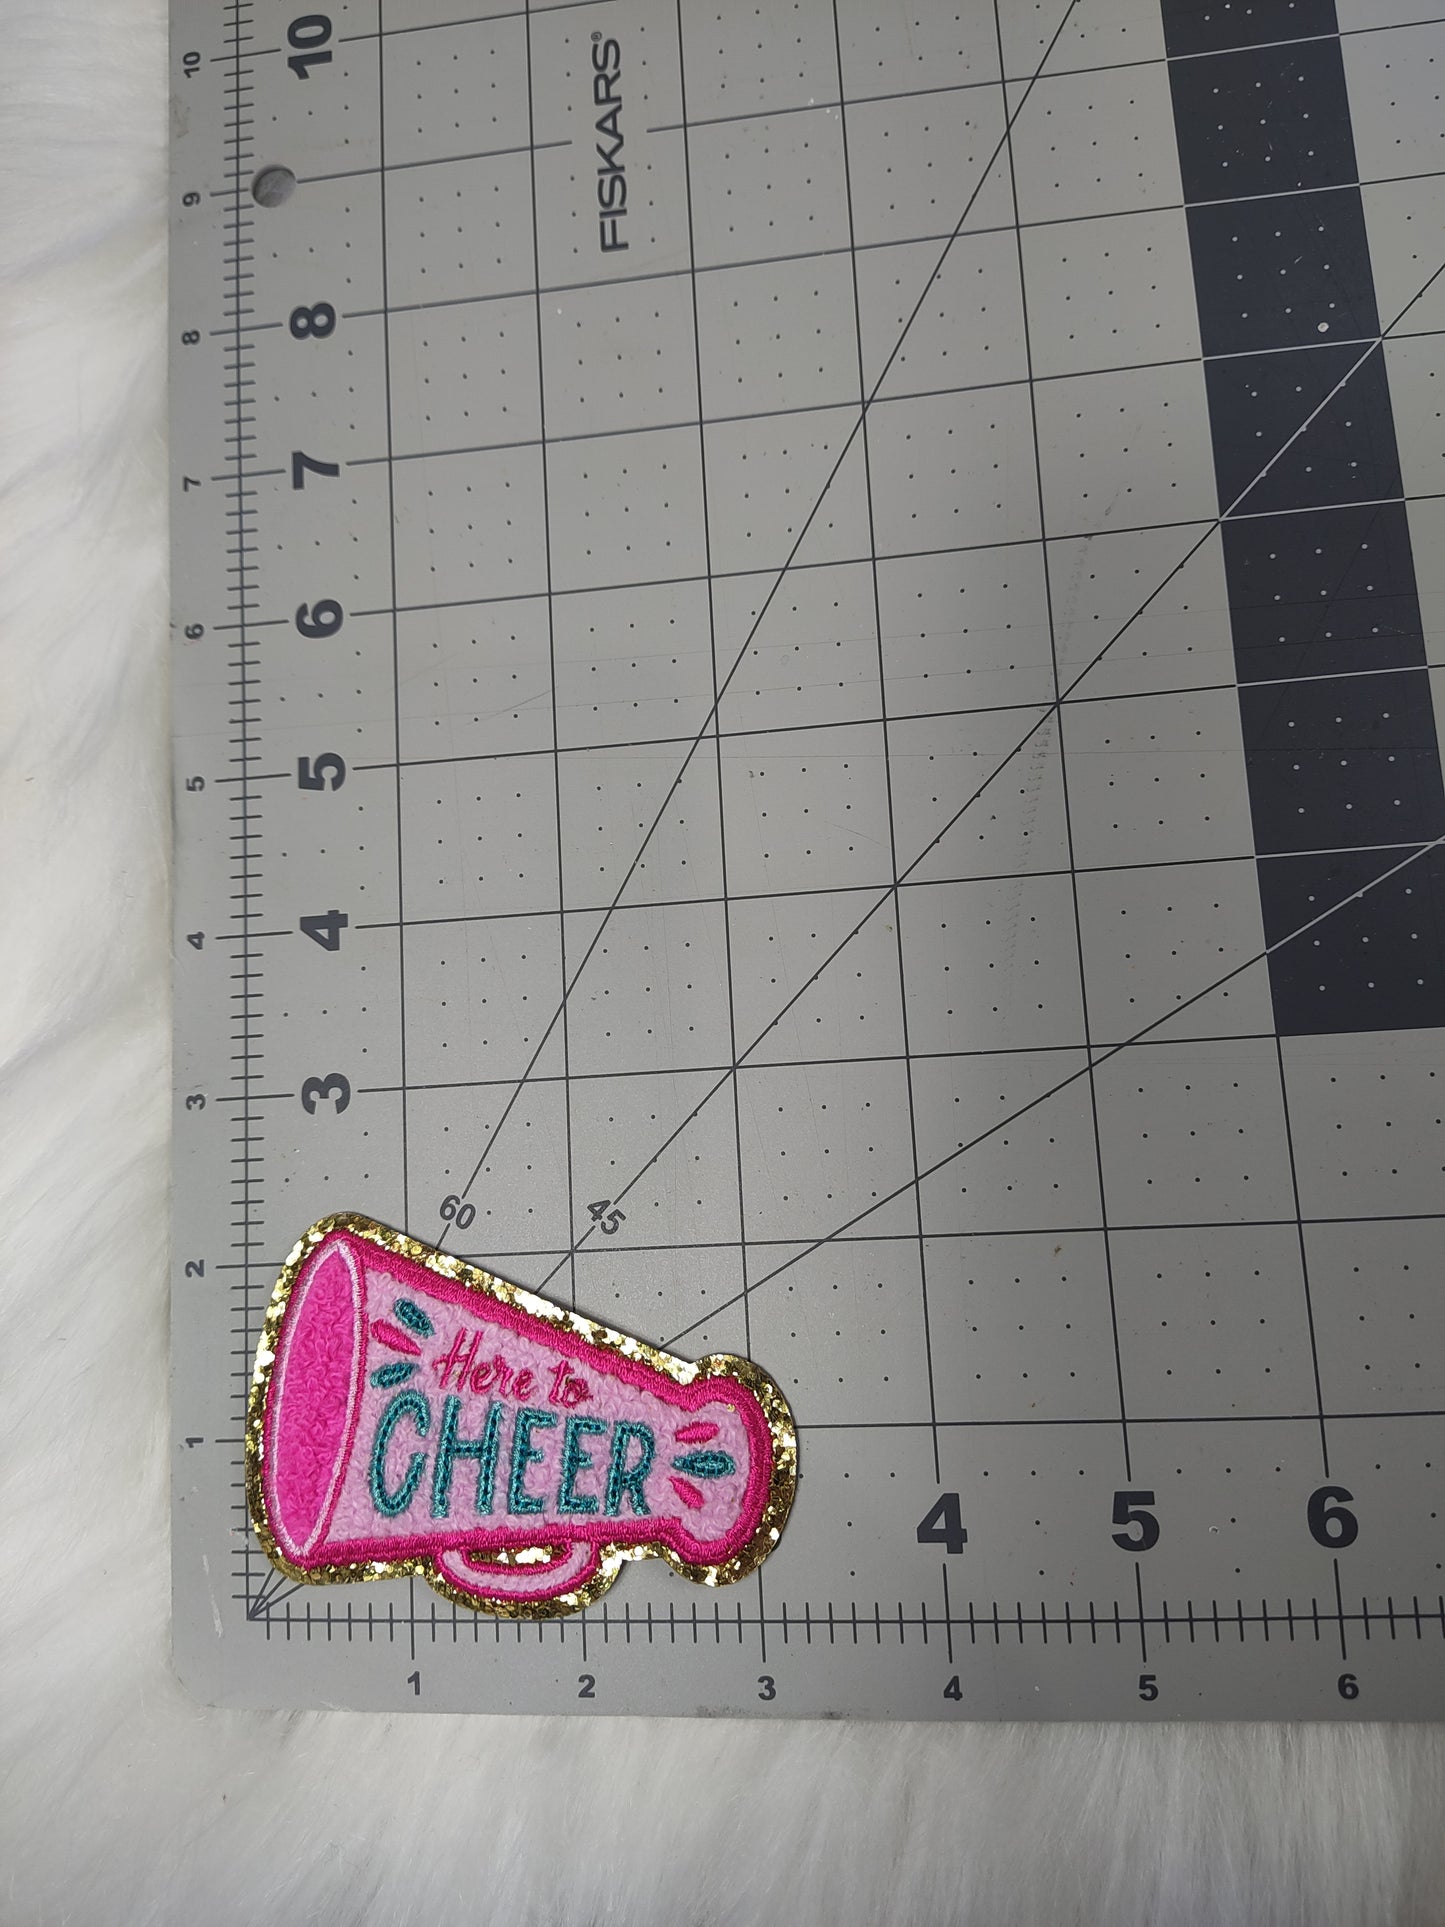 'Here to Cheer' Megaphone Pink Iron On Patch With Gold Glitter